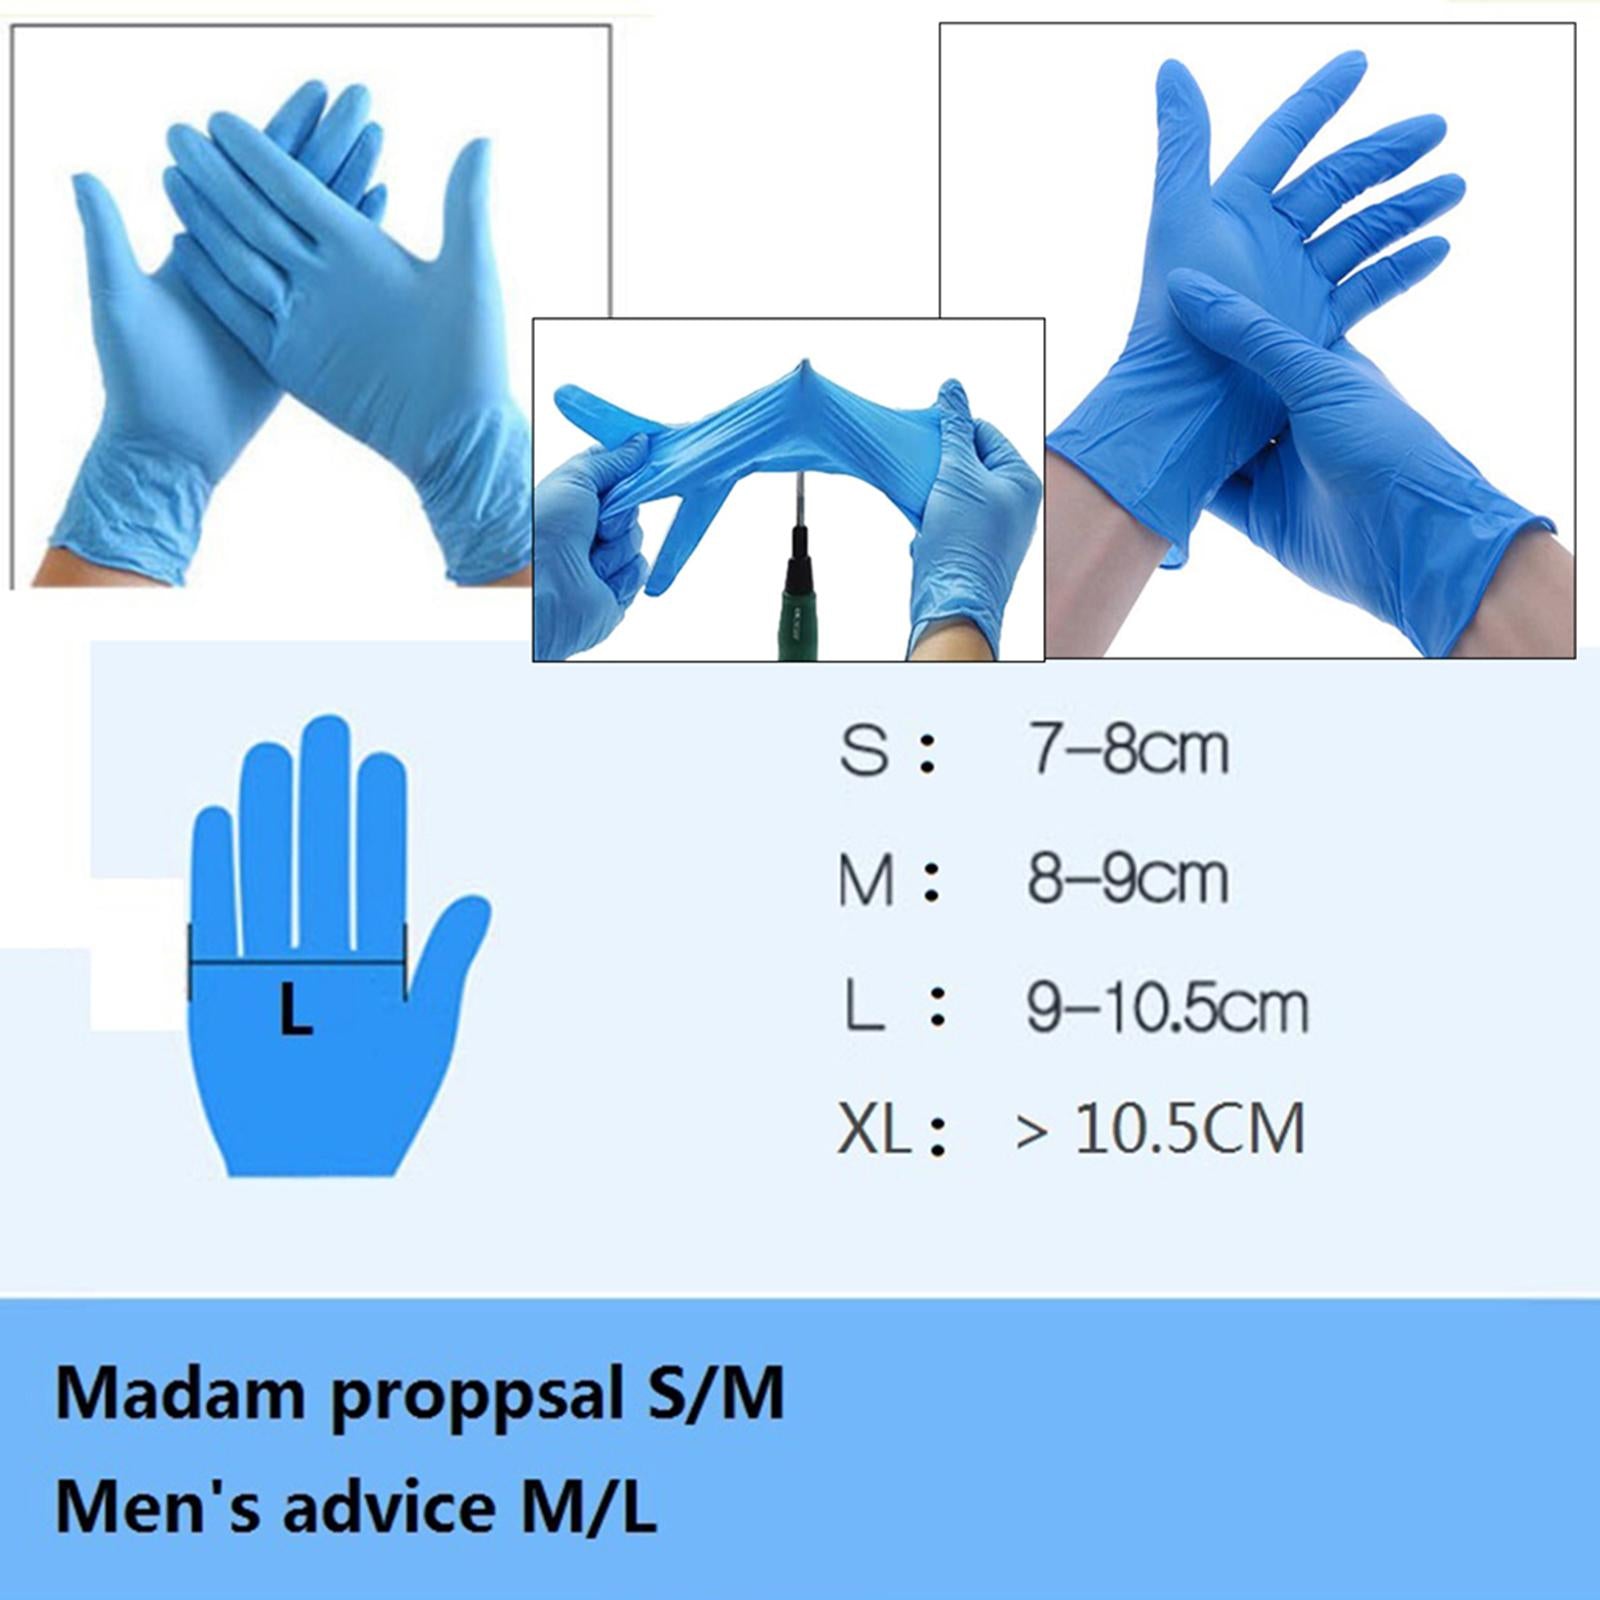 10Pcs Strong Nitrile Gloves Powder Free Pet Care Protective Gloves Blue M